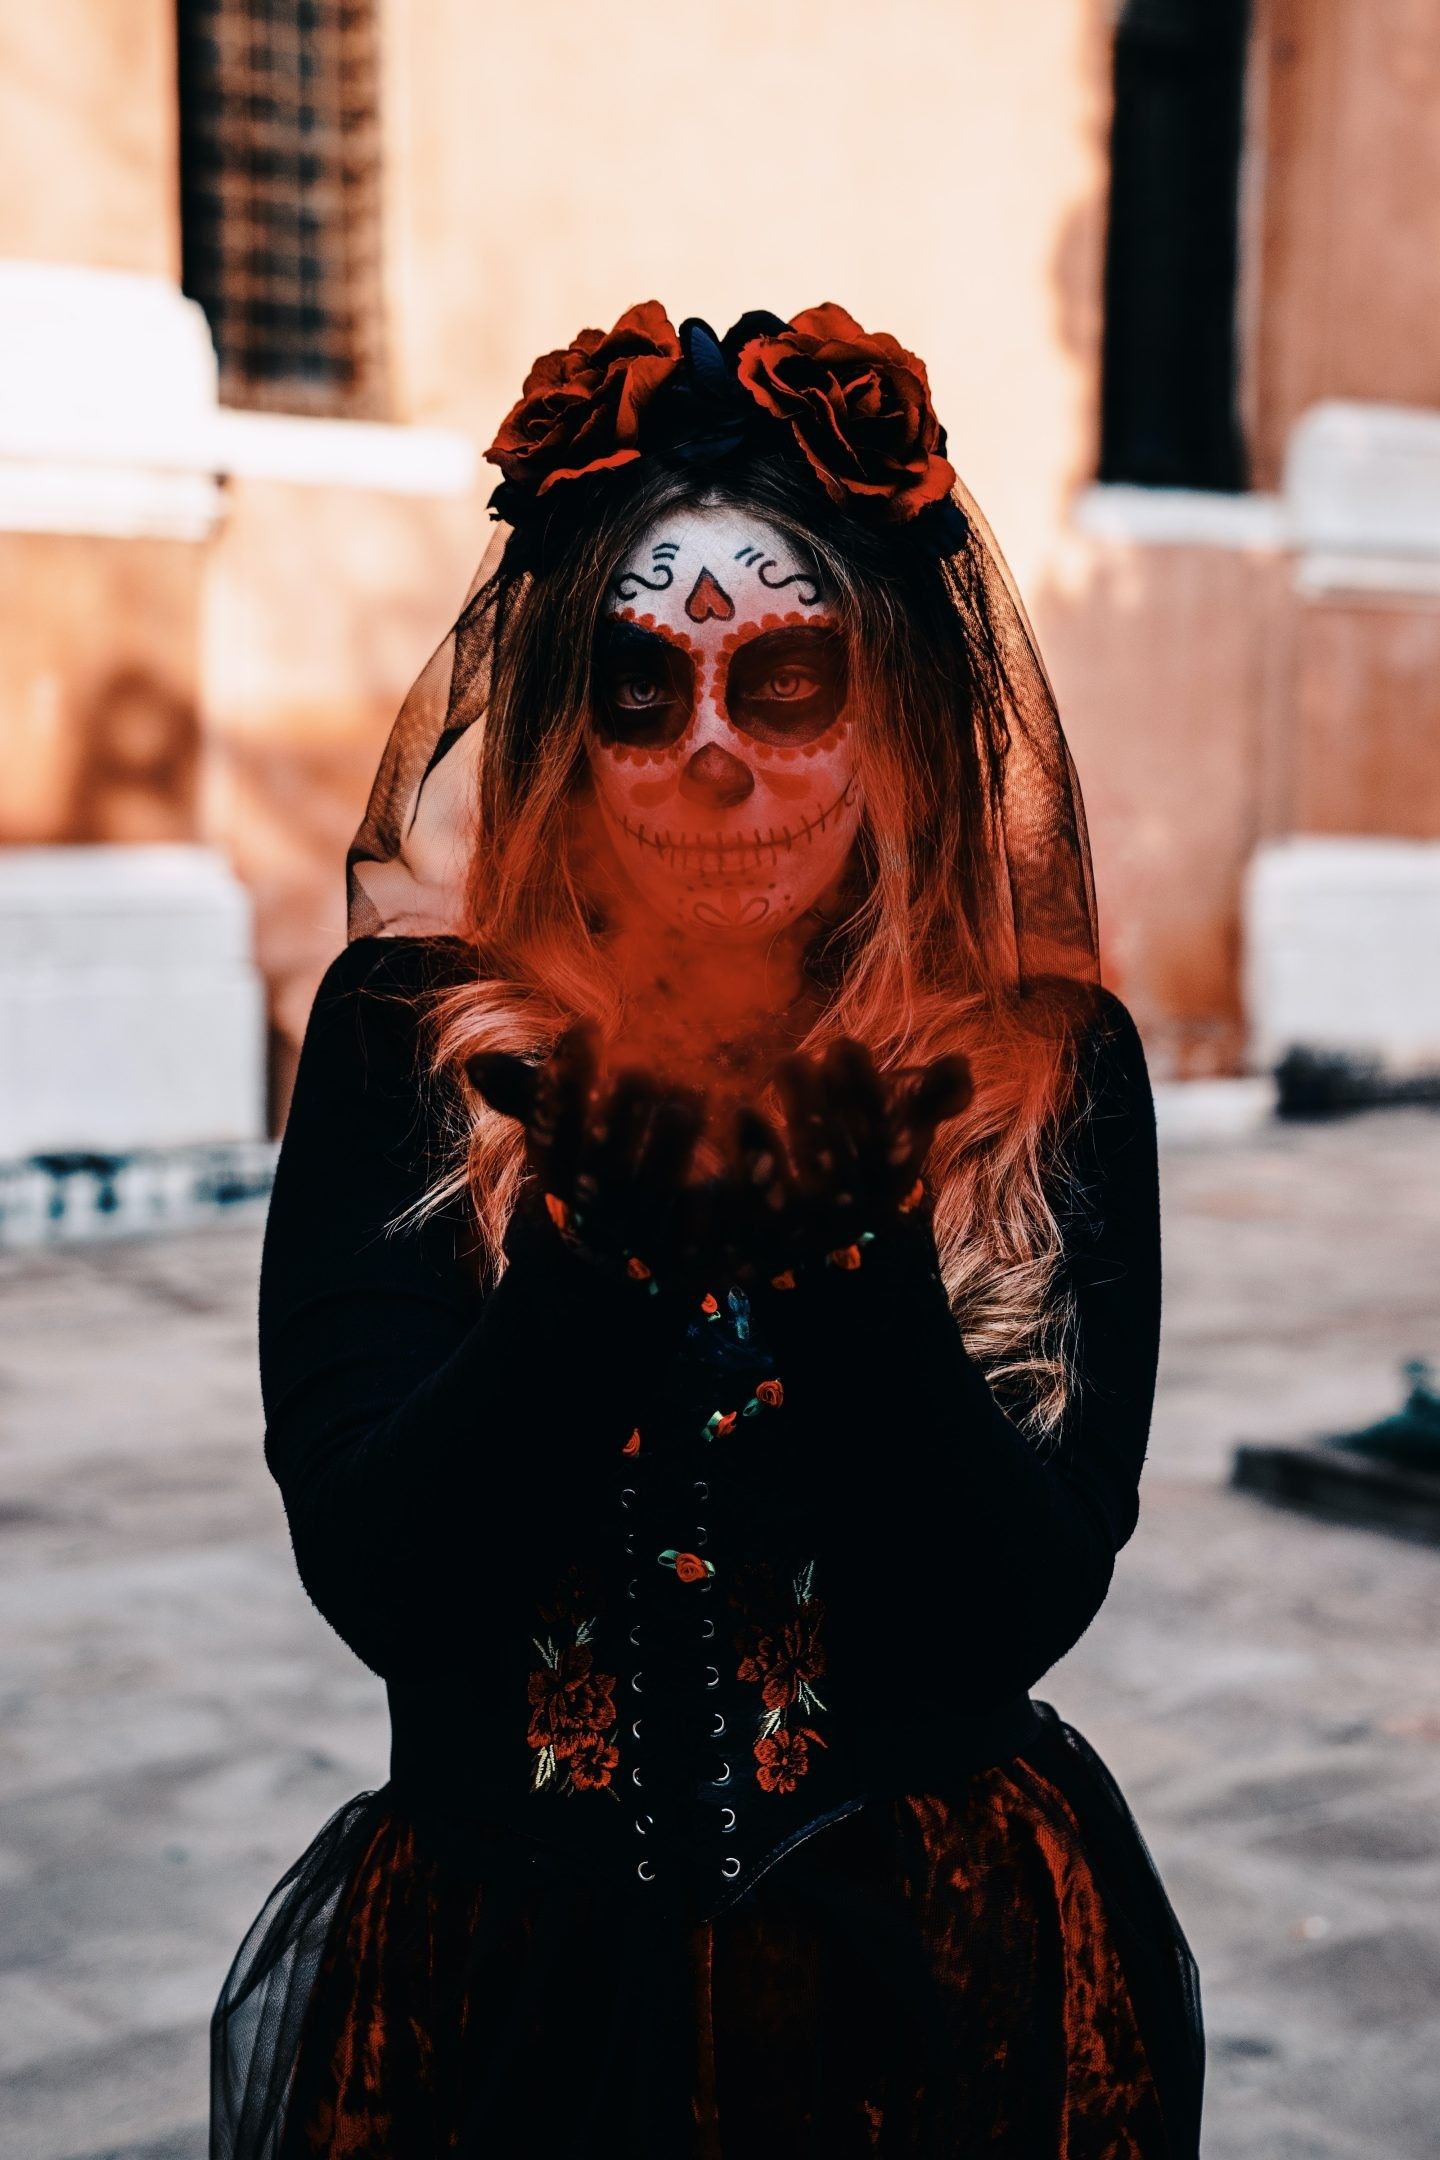 A woman with a skull makeup on her face - Halloween